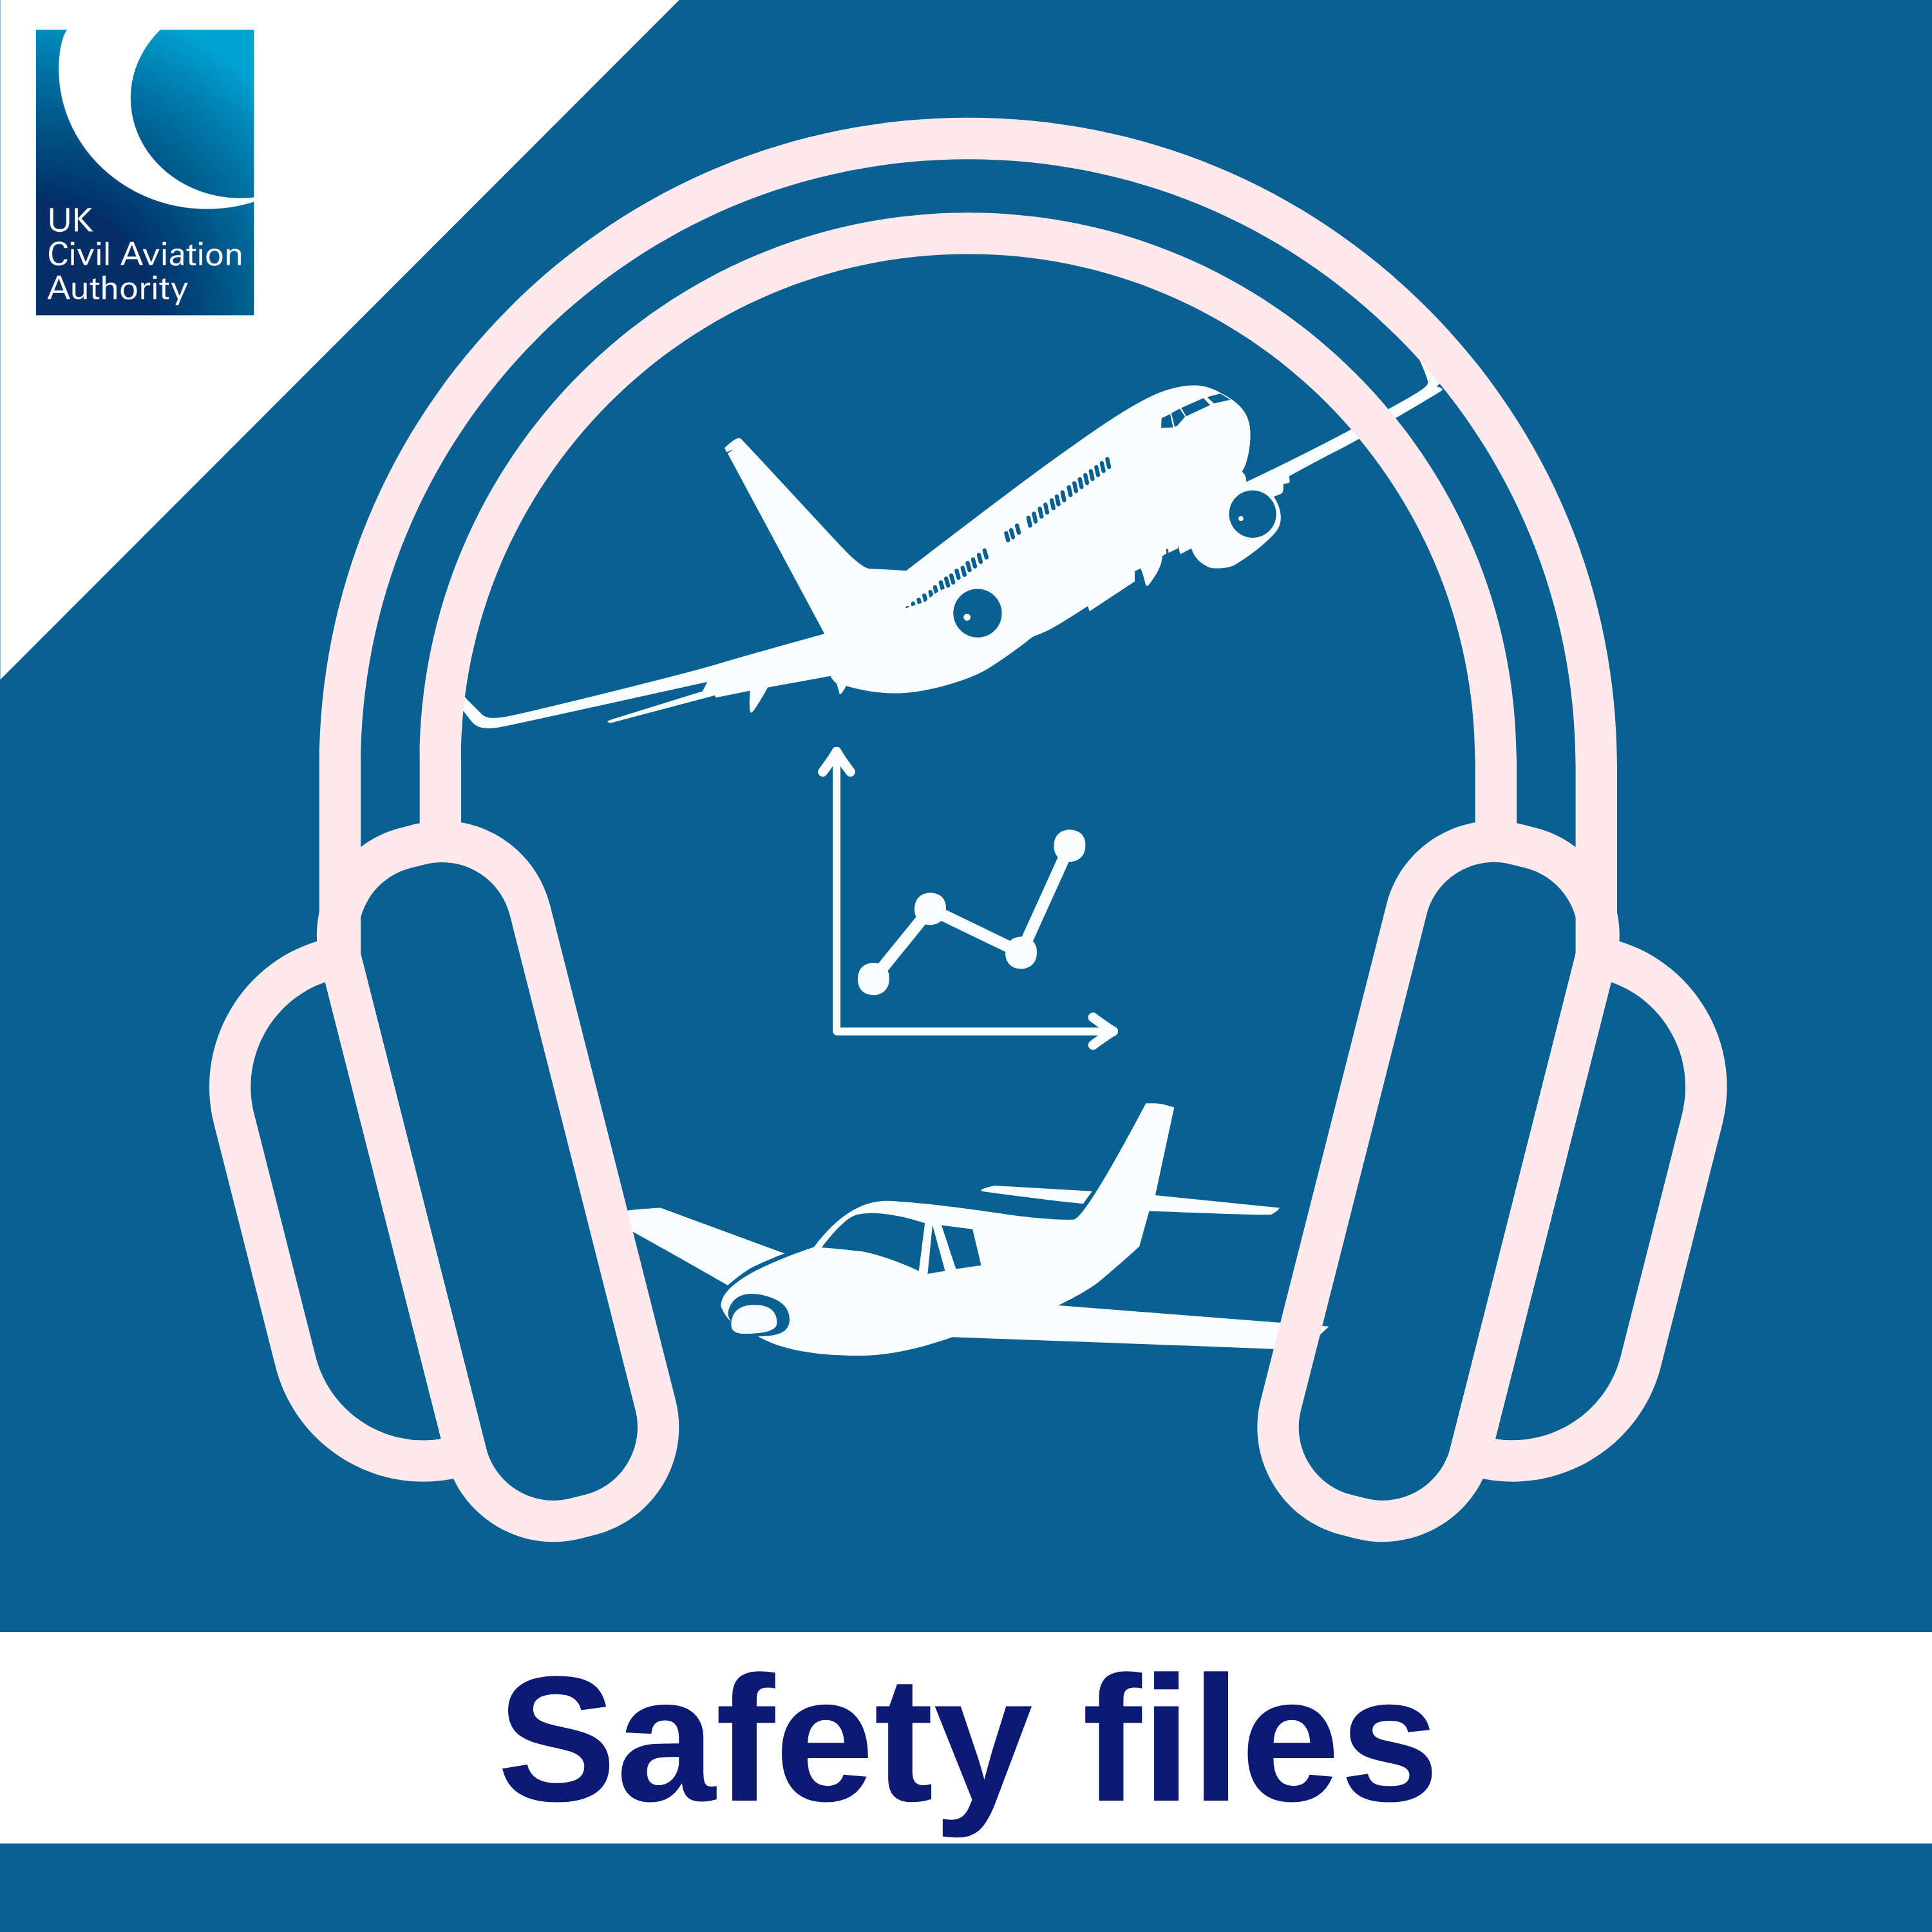 Show artwork for CAA Safety files